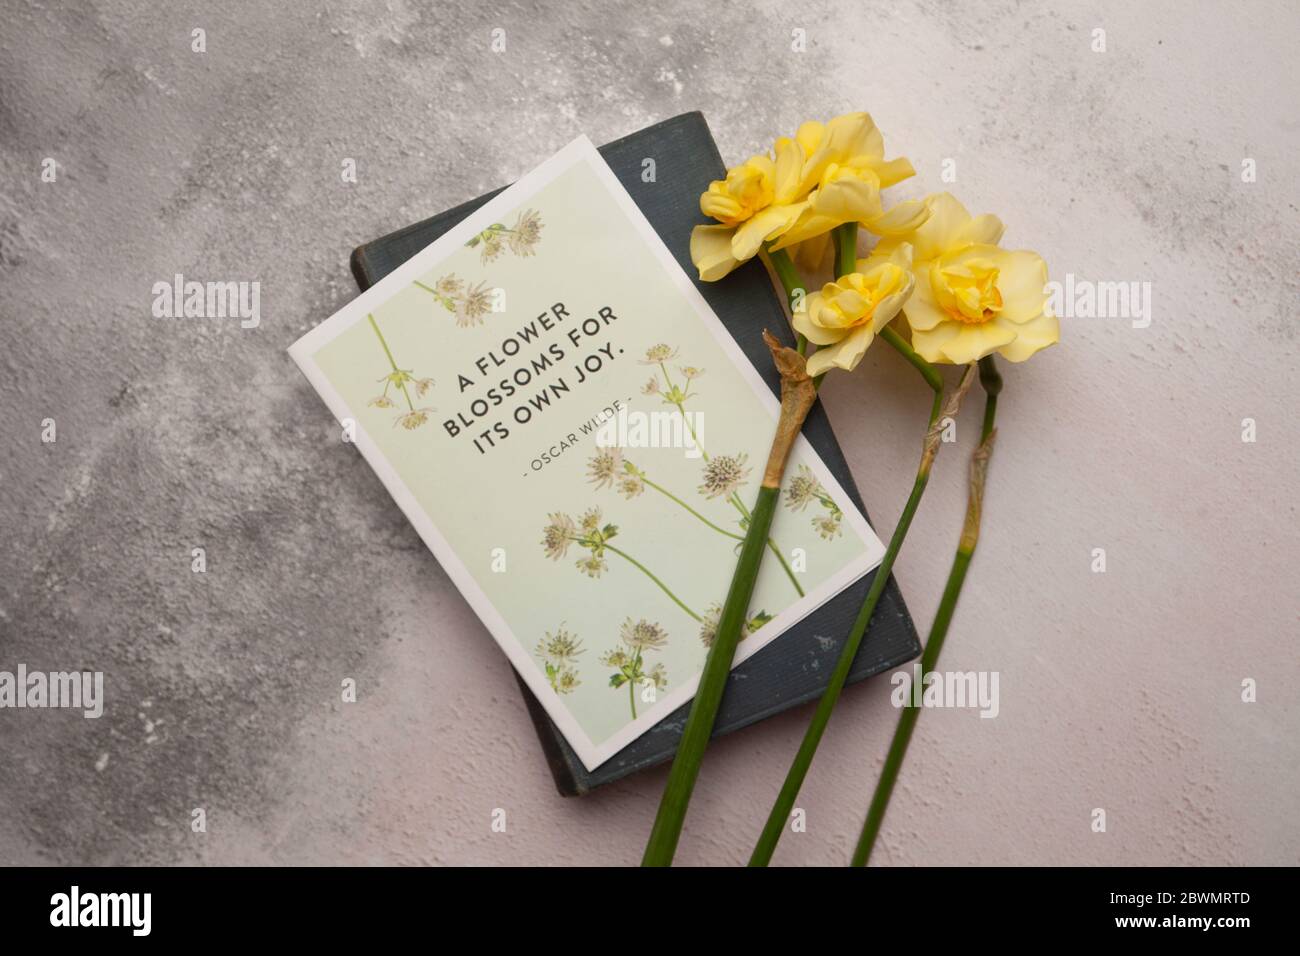 Flowers and book Stock Photo